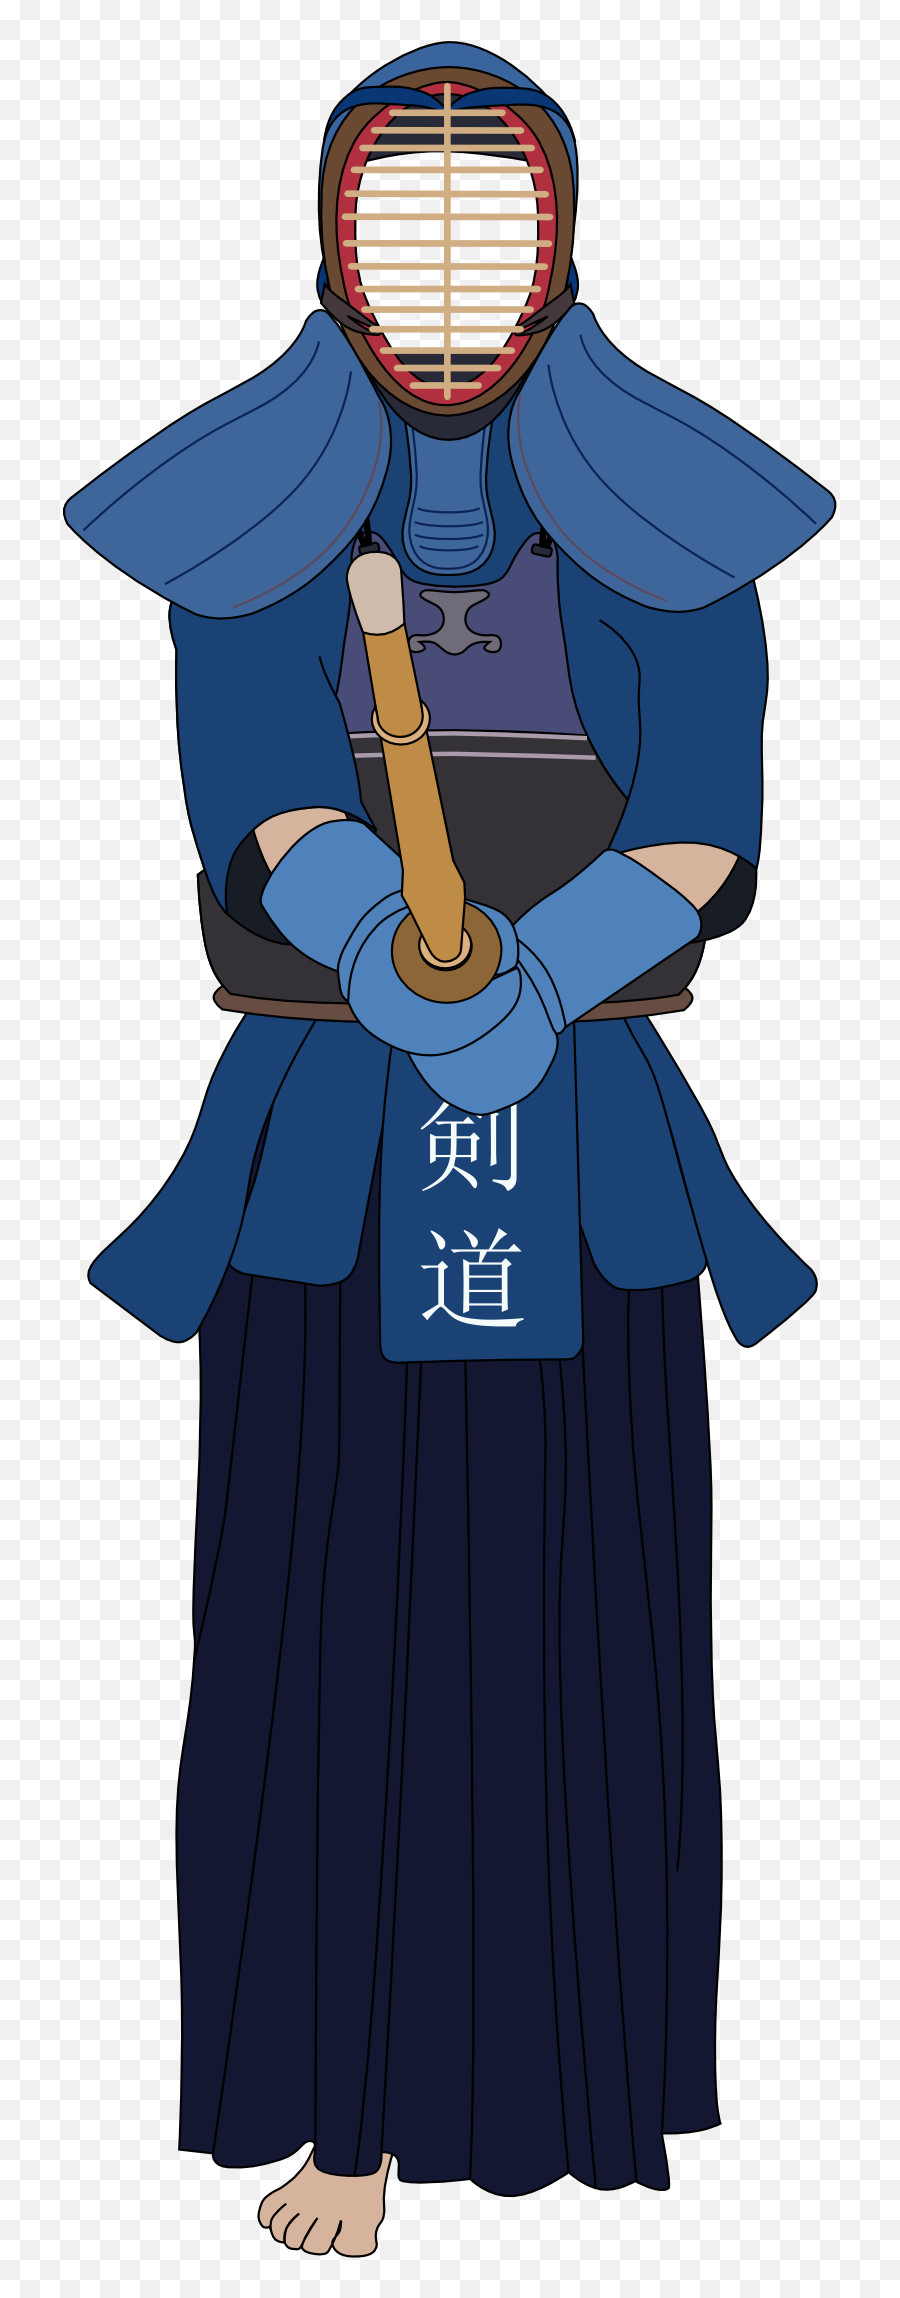 Kendo Plain - Japanese Sword Fighting Styles Png,Plain Png